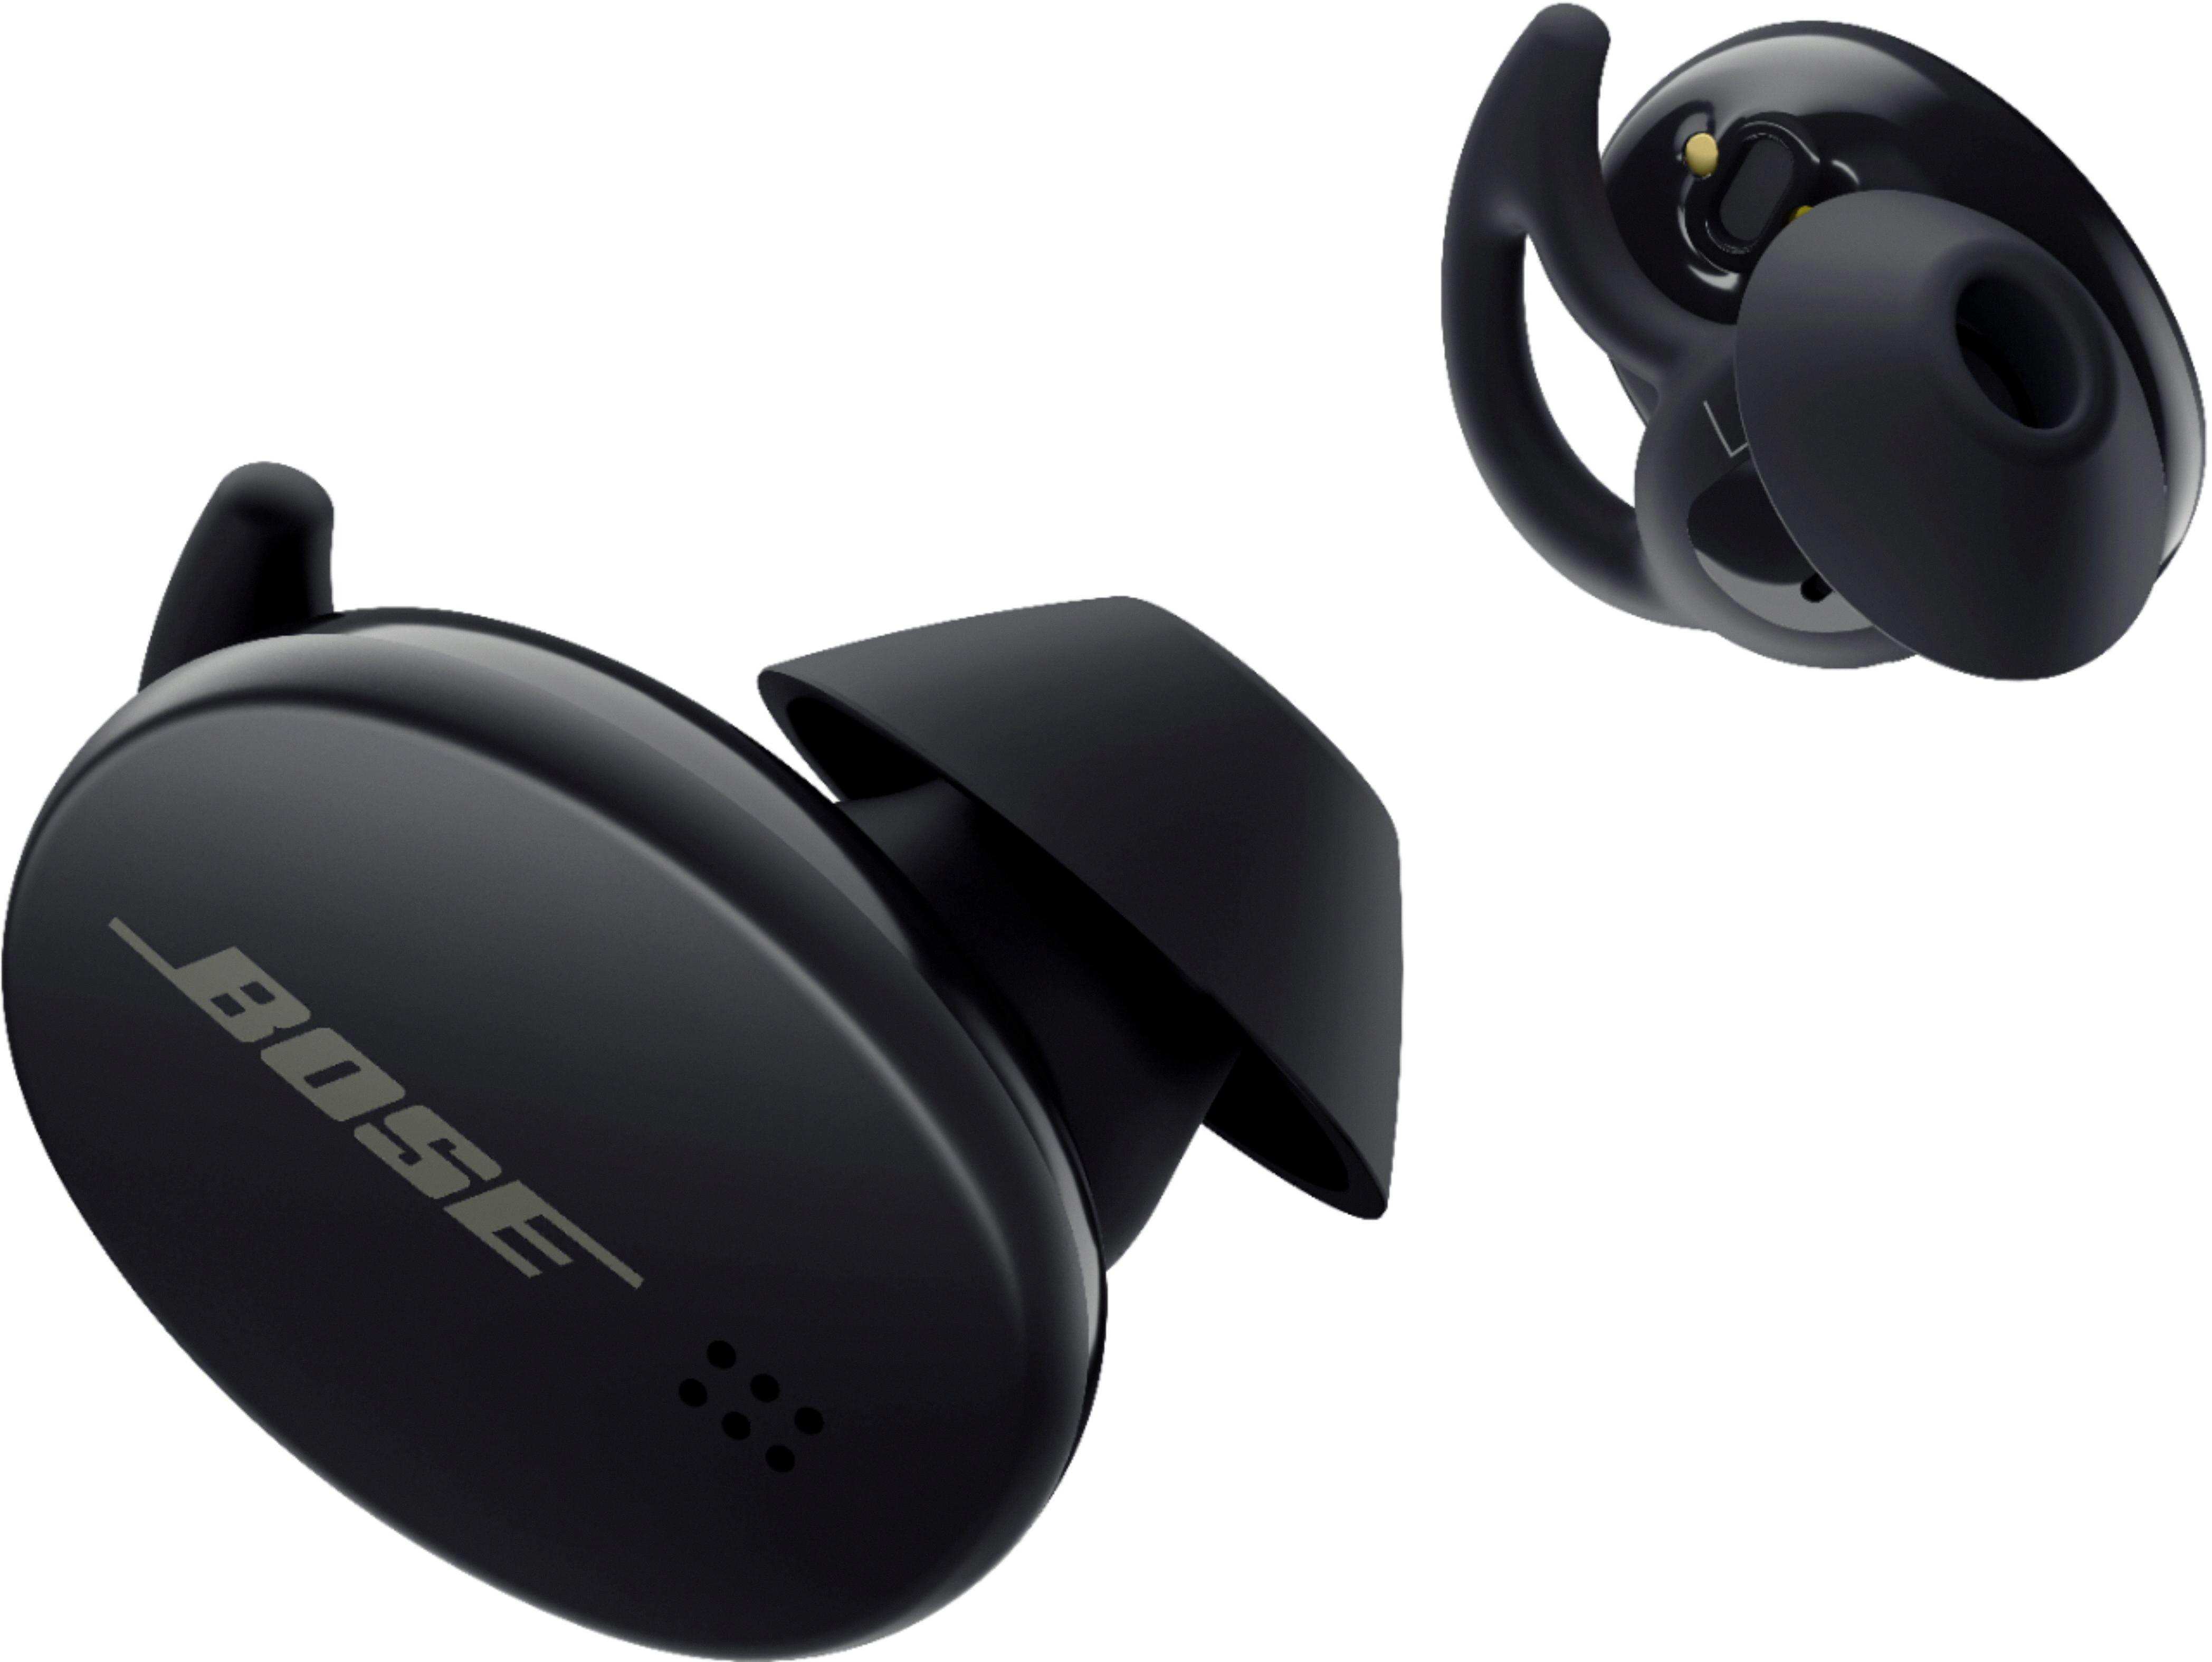 How to Pair Bose Earbuds for Audio Enjoyment 9